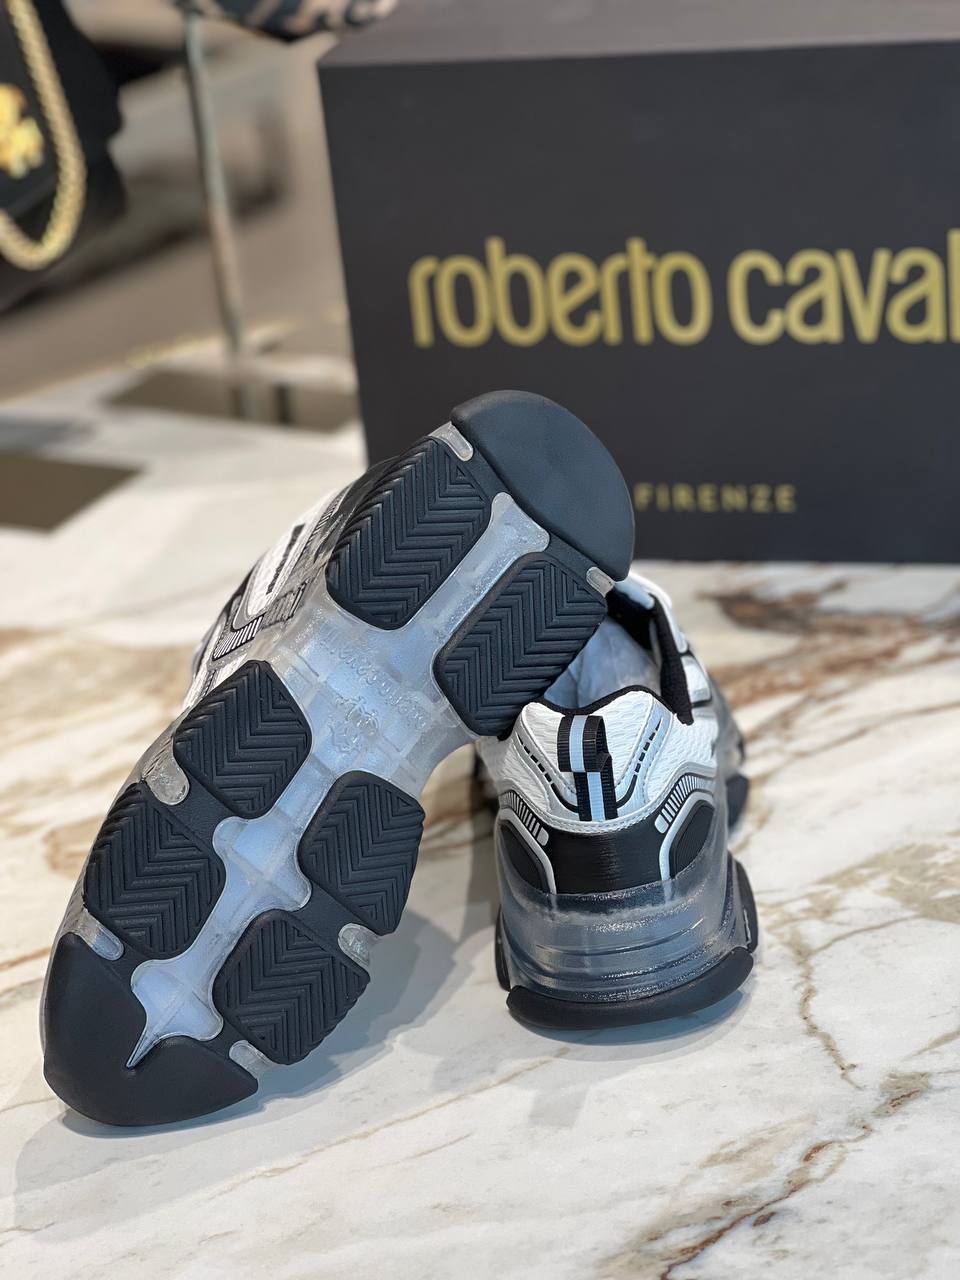 Roberto Cavalli Outlets 5186